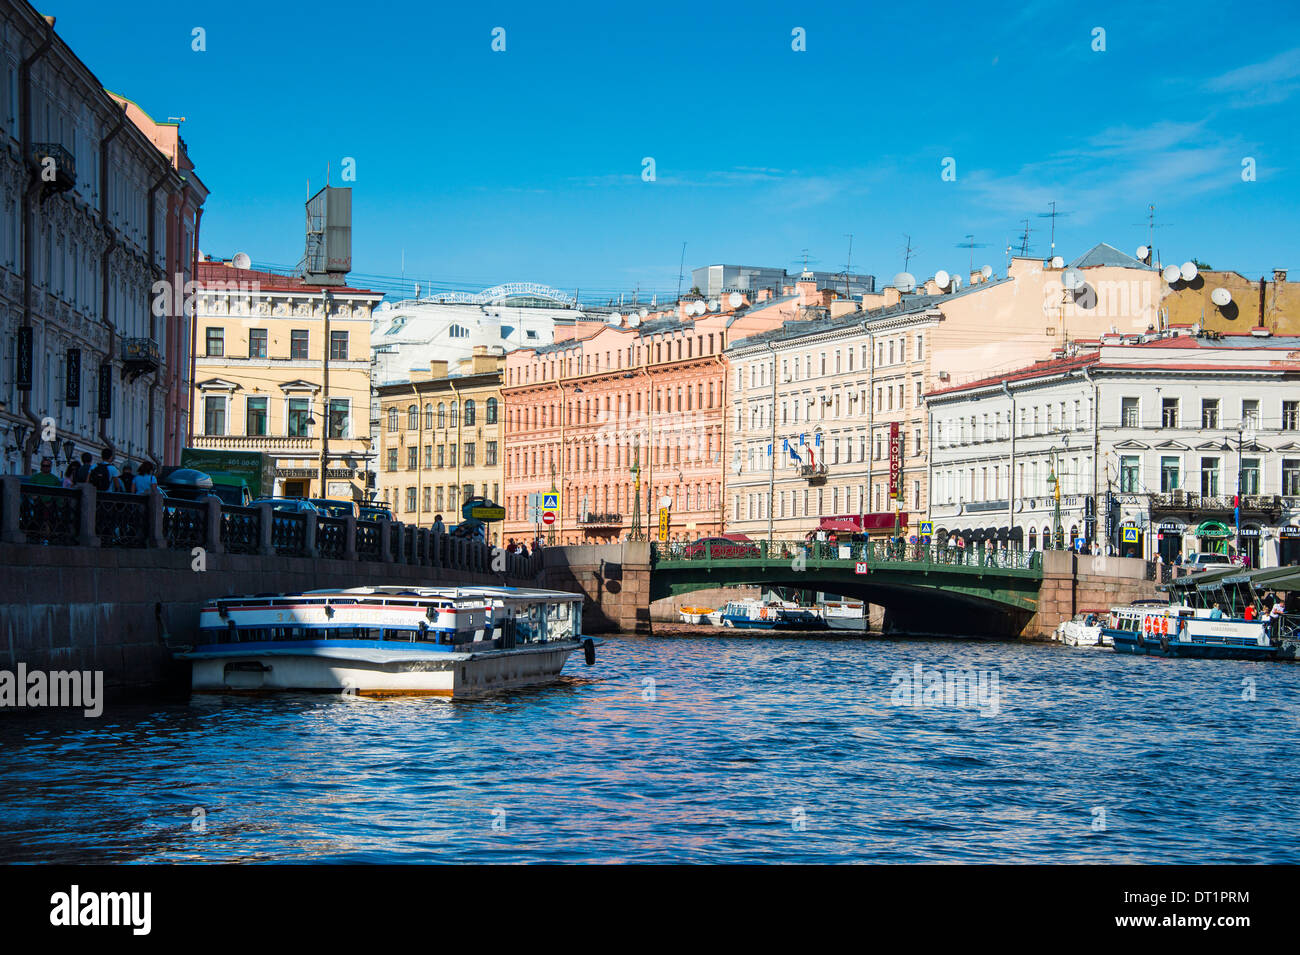 Tourist boat on a water channel in the center of St. Petersburg, Russia, Europe Stock Photo